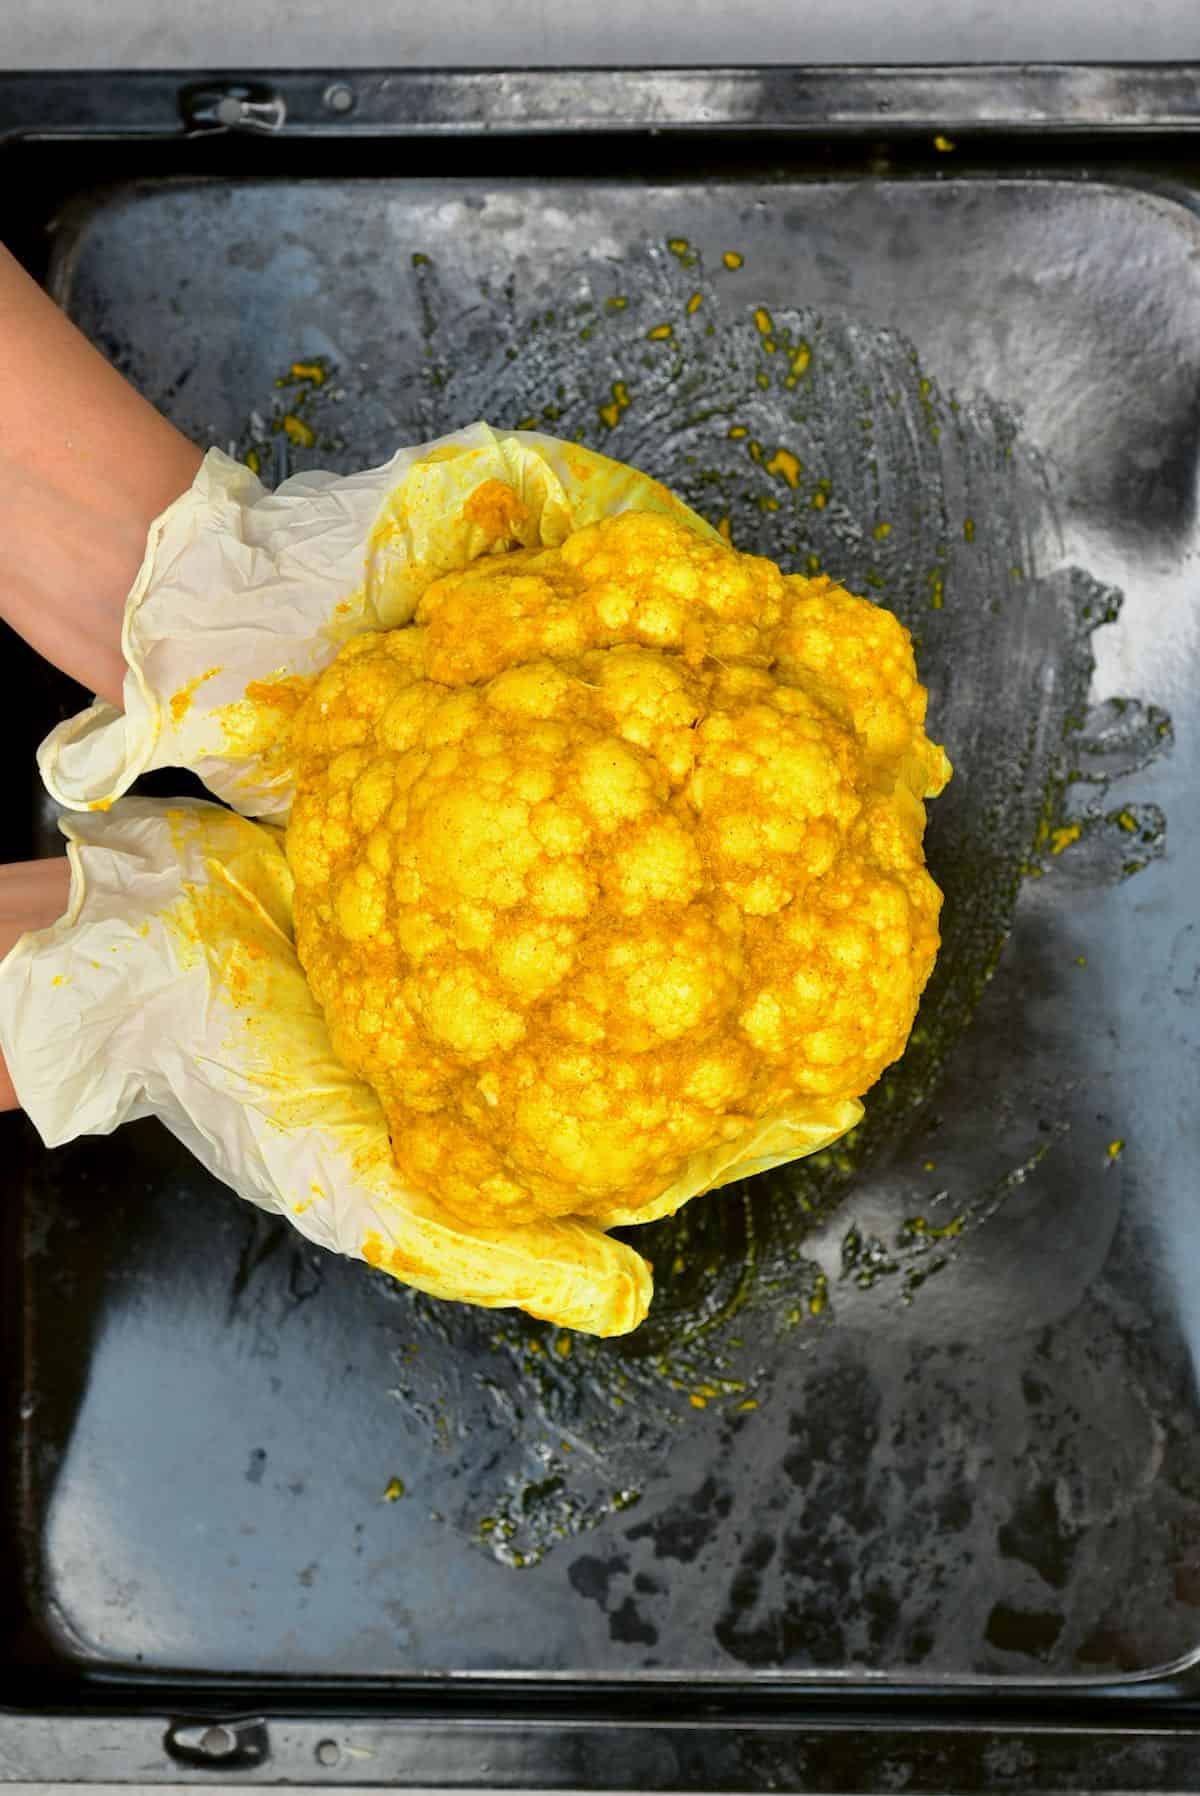 A cauliflower head covered with turmeric oil mixture over a baking tray